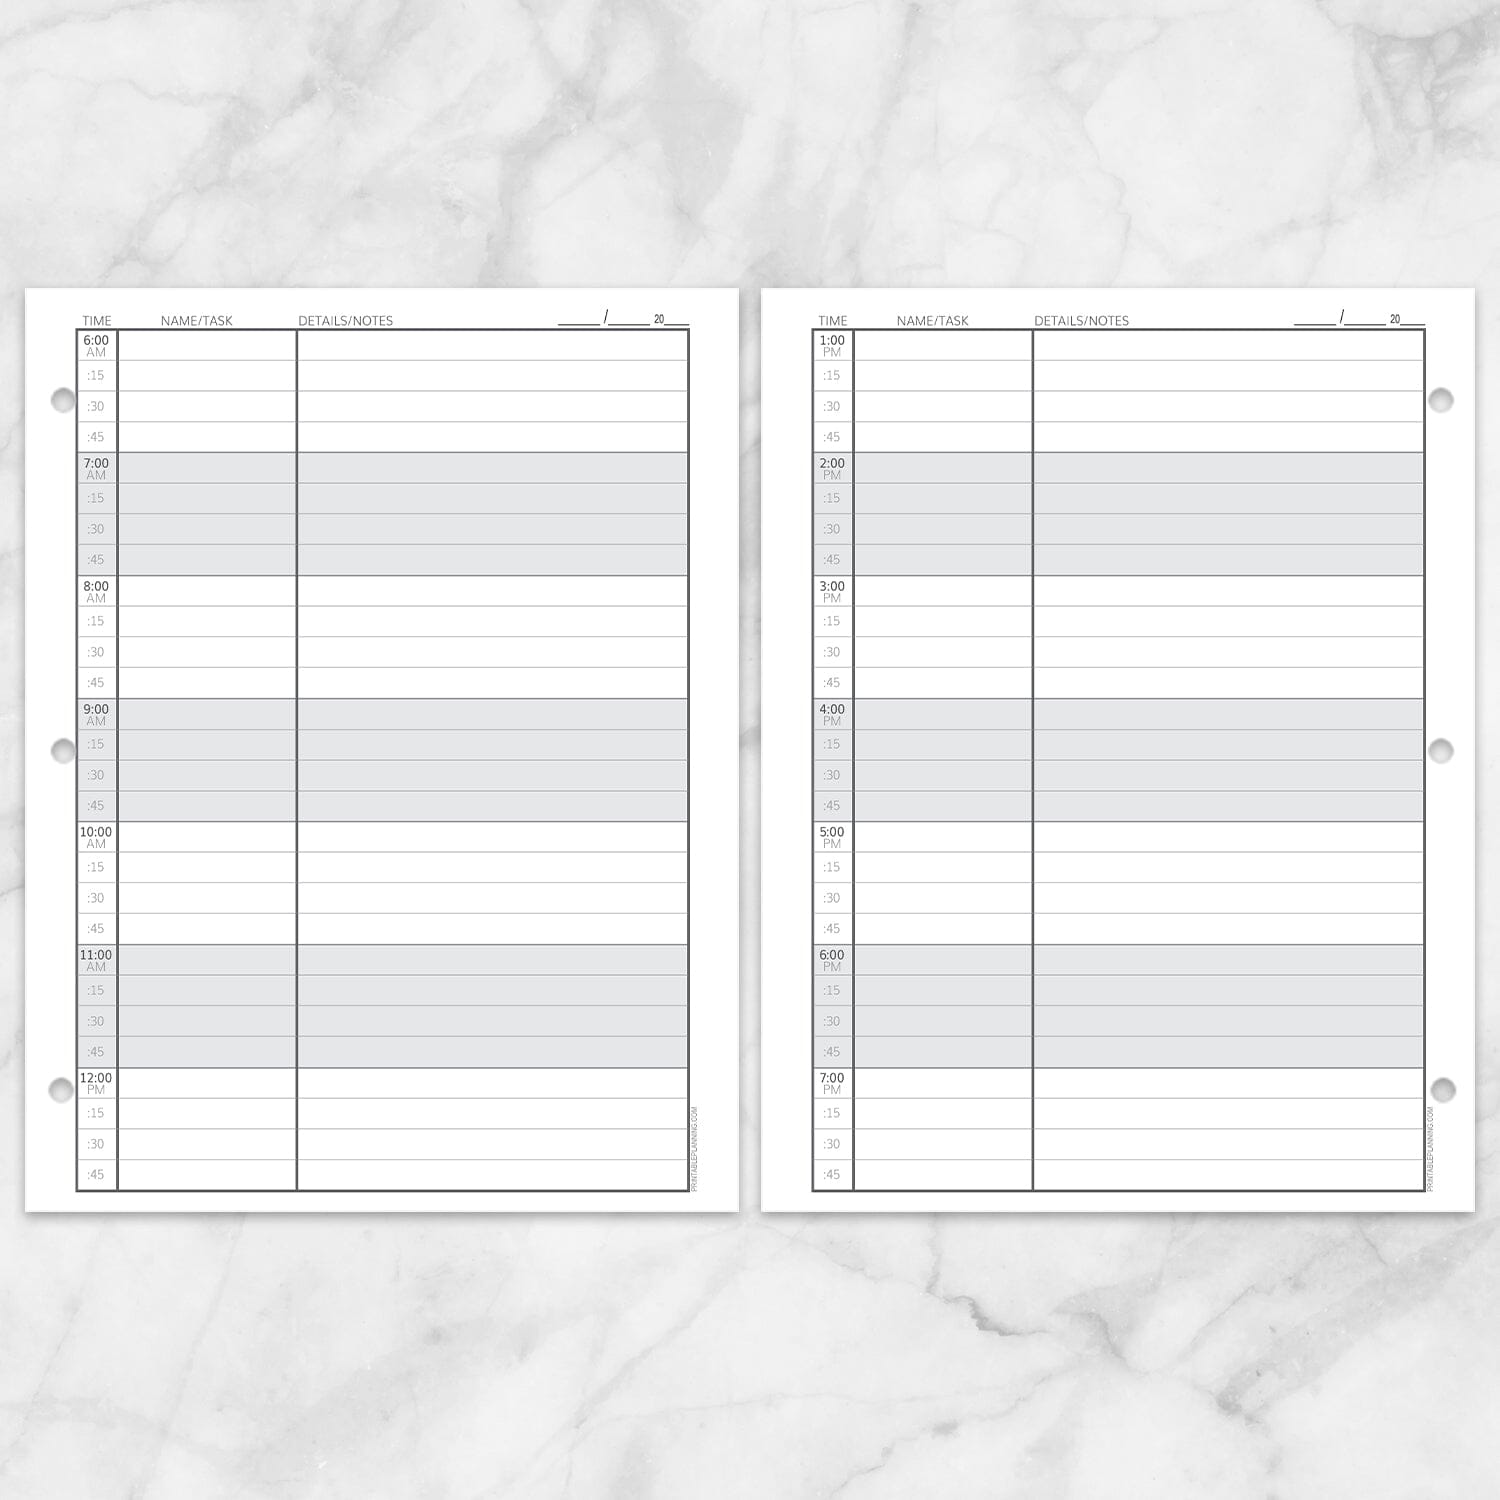 Printable Scheduling Sheet with Notes, pages 1 and 2 with 3-hole punch for front and back printing, at Printable Planning.